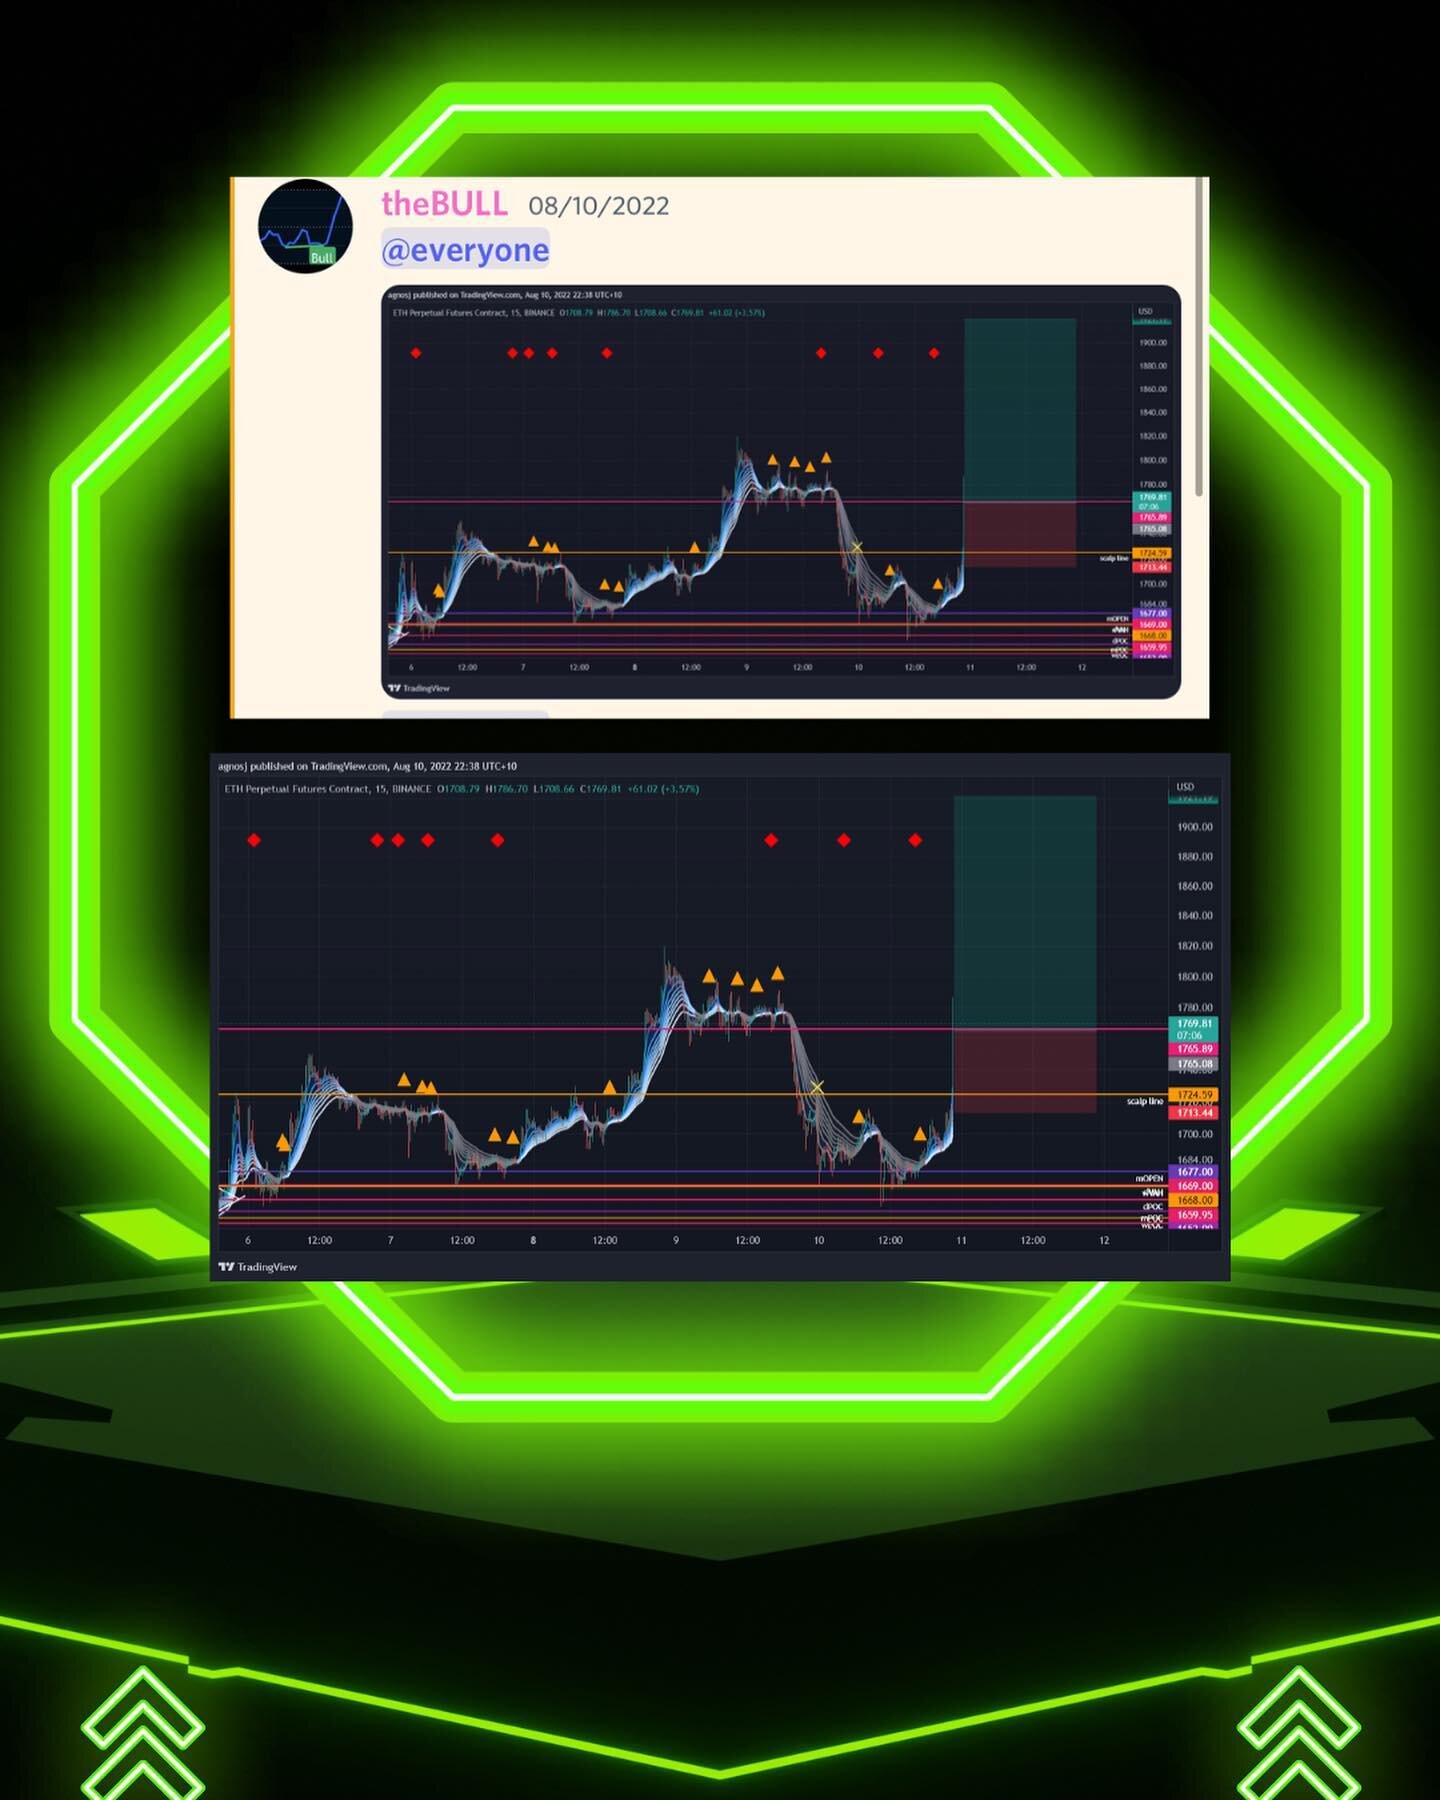 Technical &amp; Fundamental analysis put into action with this sniper trade idea from one of our lead educators 🎯 a day and all targets hit. 

Want to learn more? Link in bio 📩